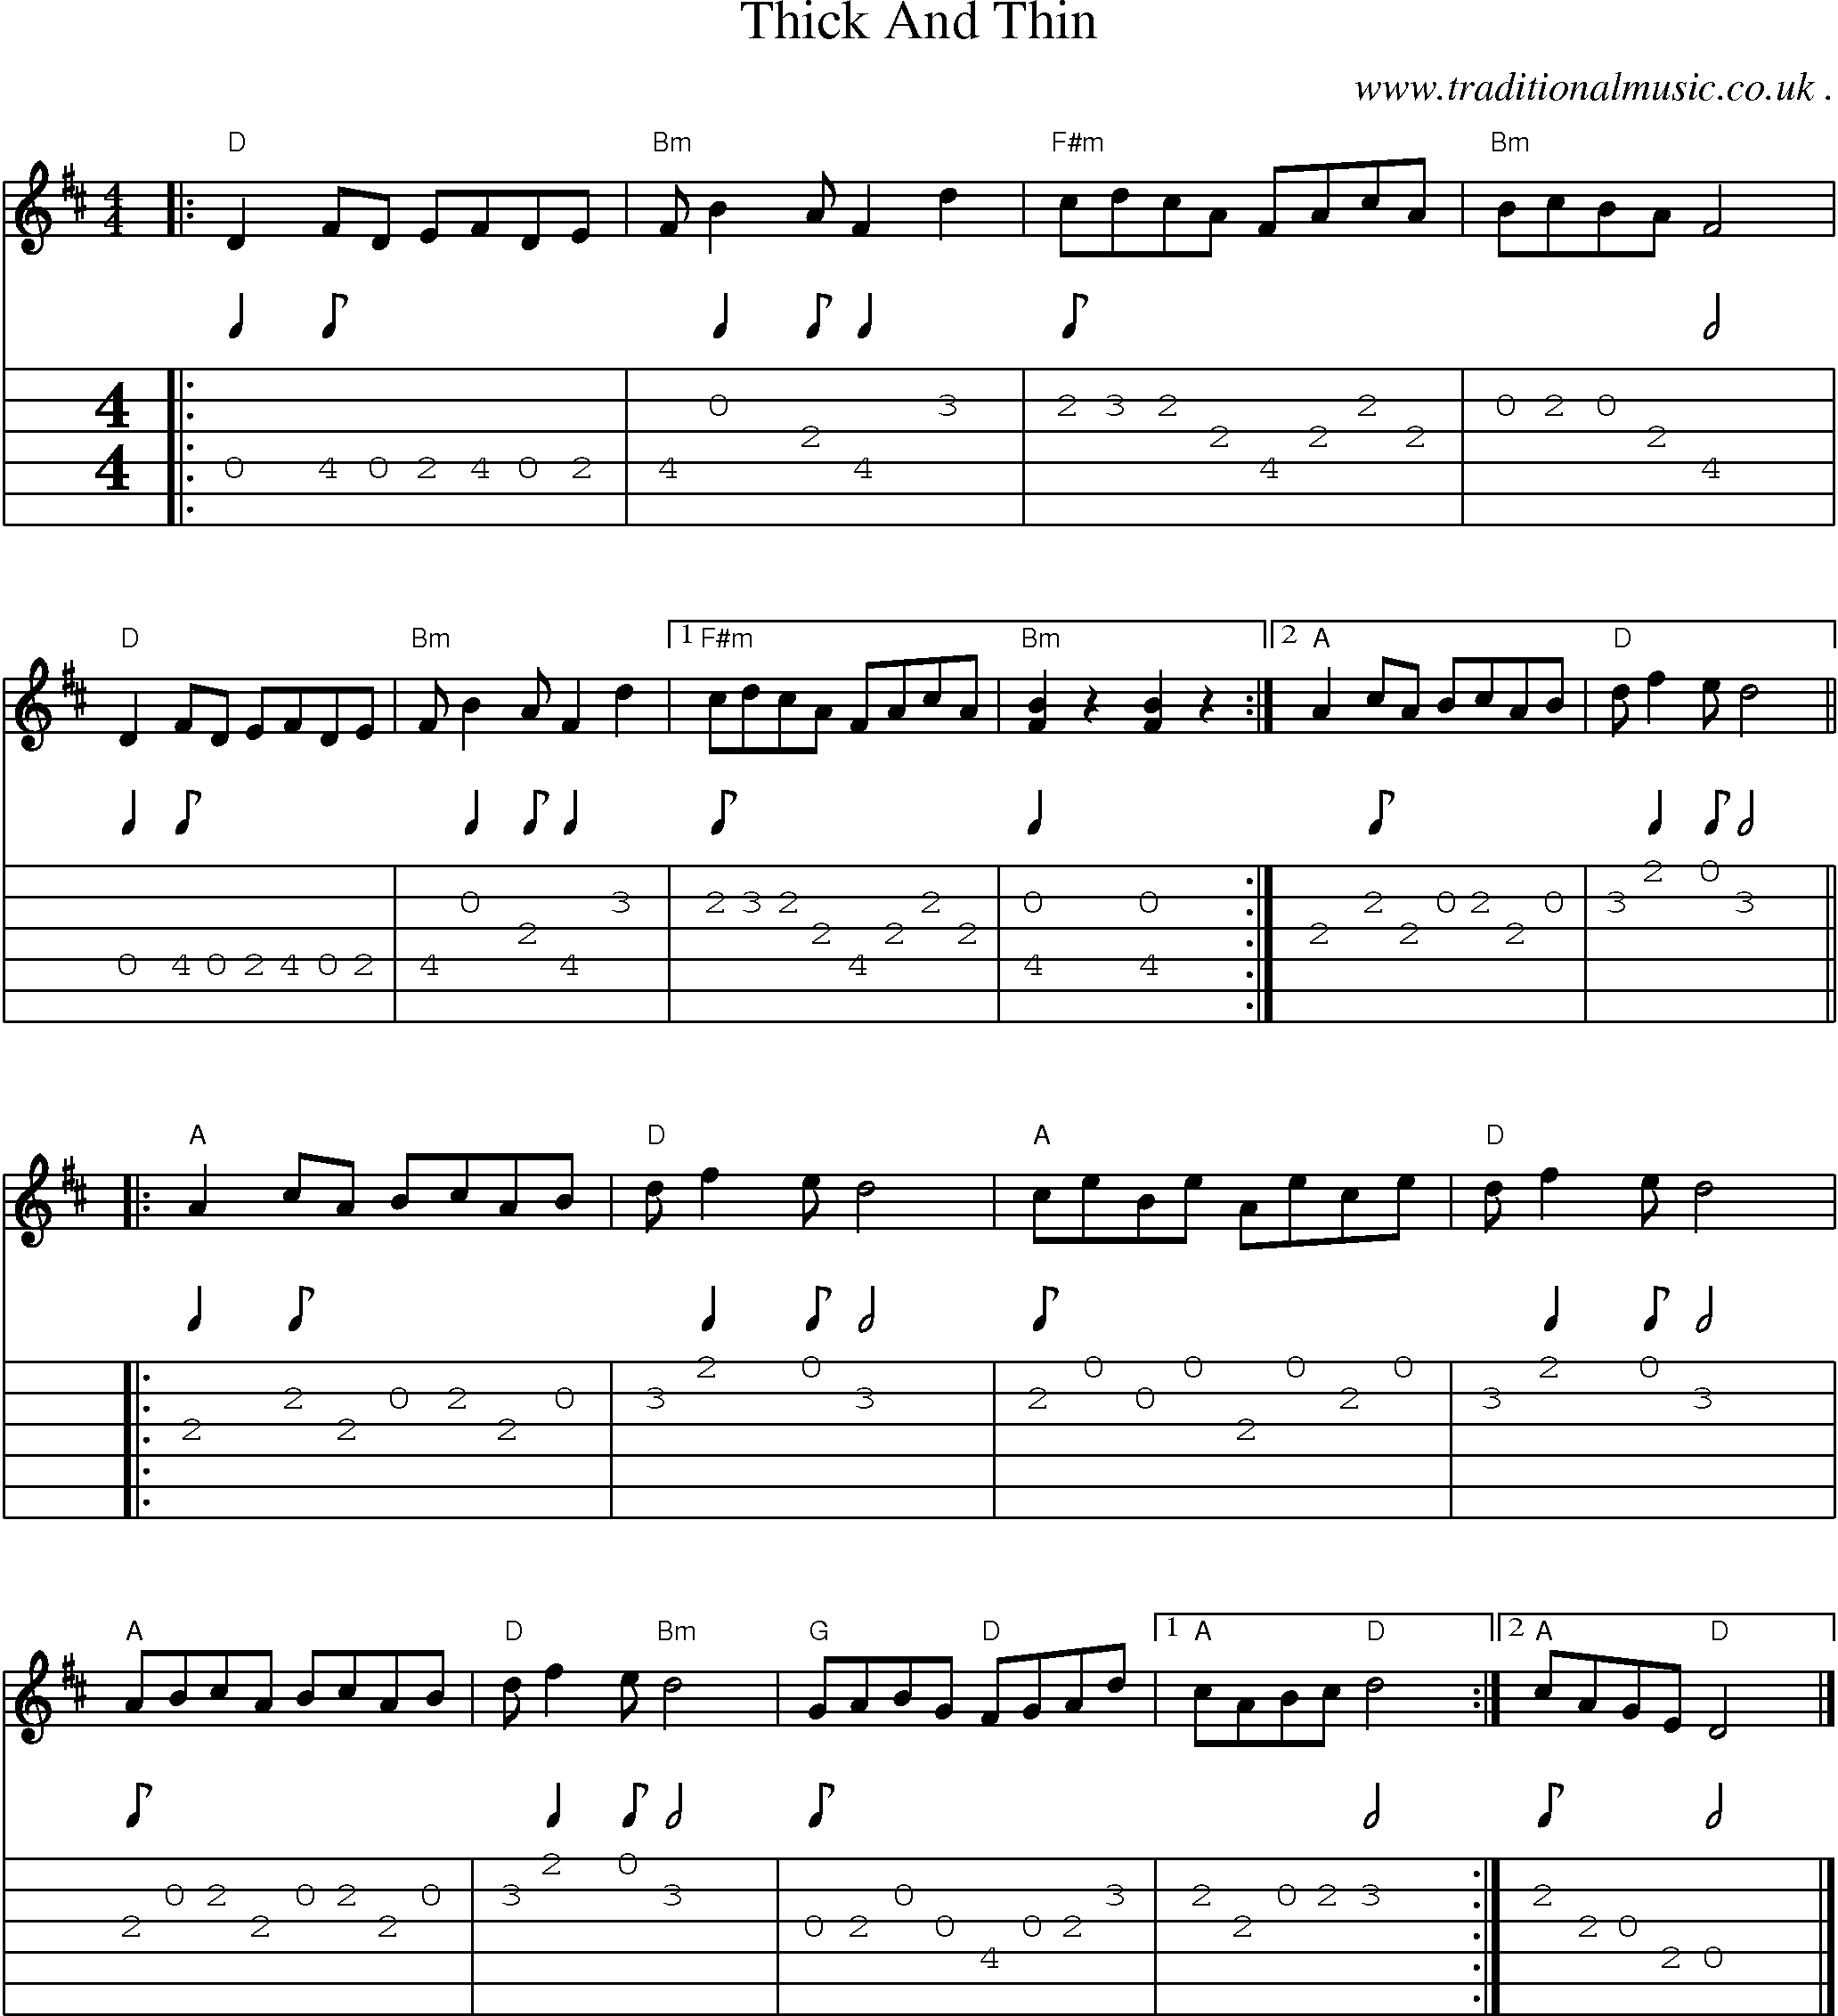 Music Score and Guitar Tabs for Thick And Thin